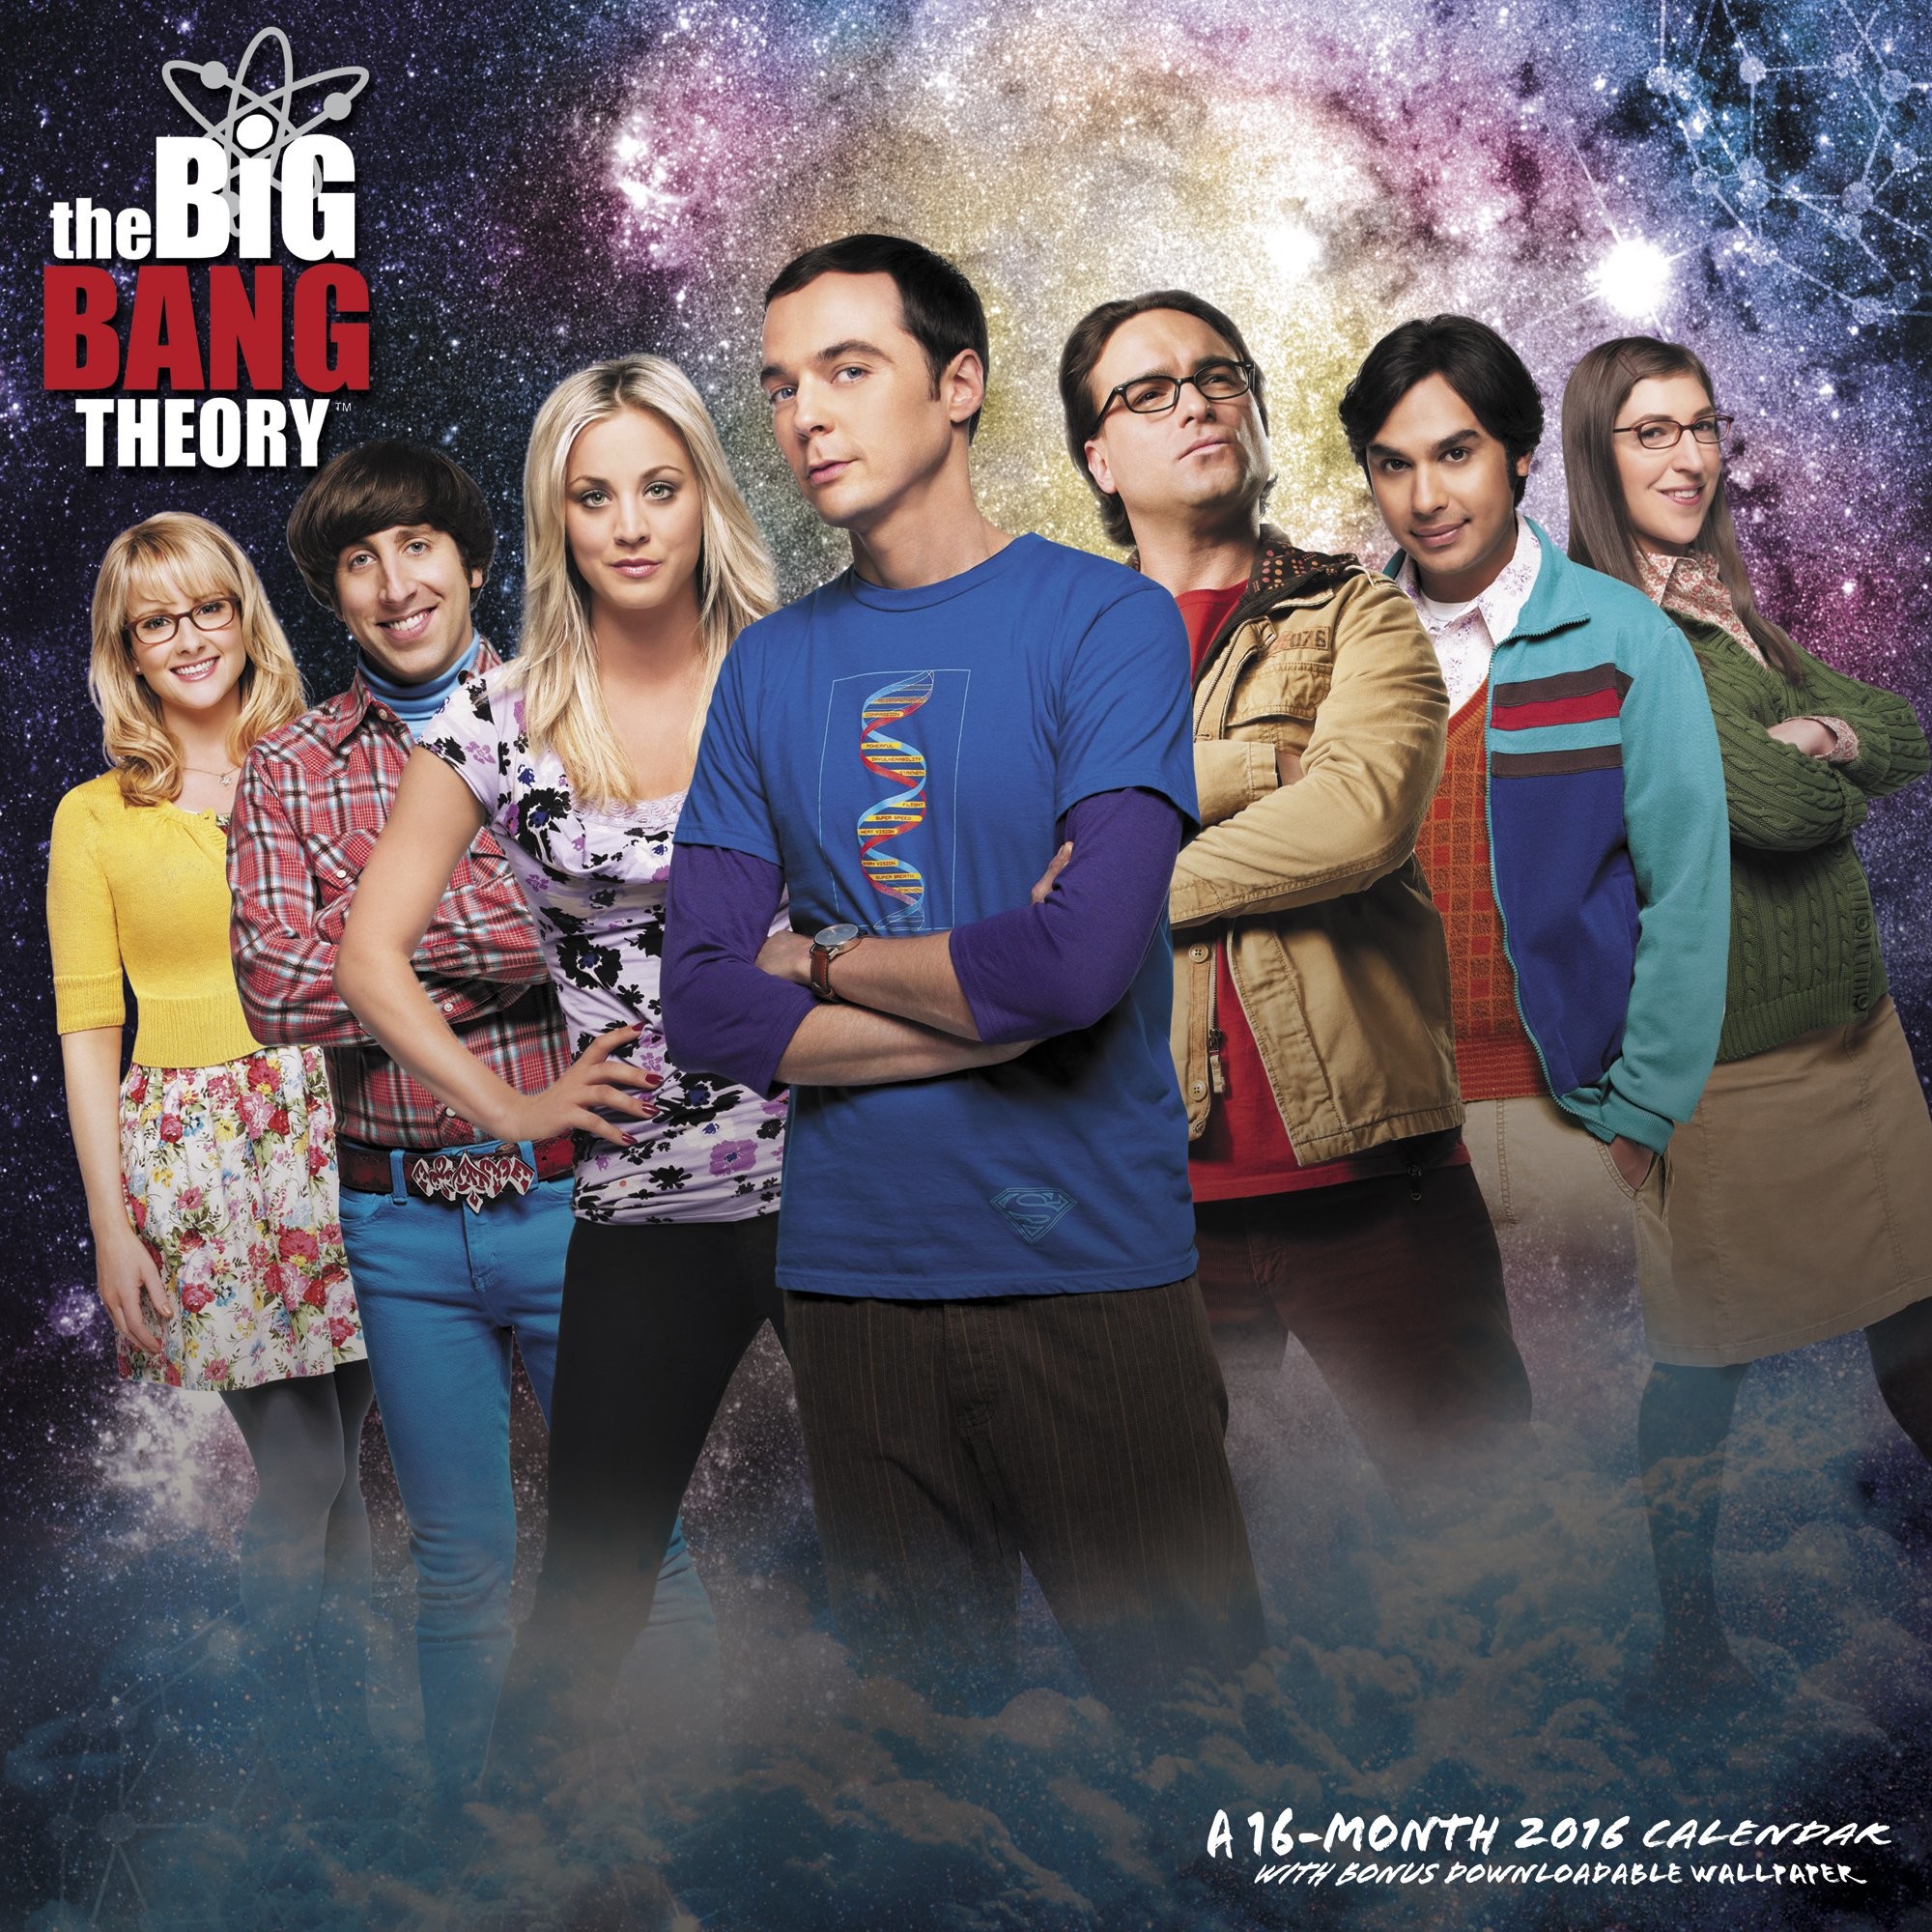 2000x2000 Amazon.in: Buy The Big Bang Theory 2016 Calendar: Free Downloadable  Wallpaper Included Book Online at Low Prices in India | The Big Bang Theory  2016 ...